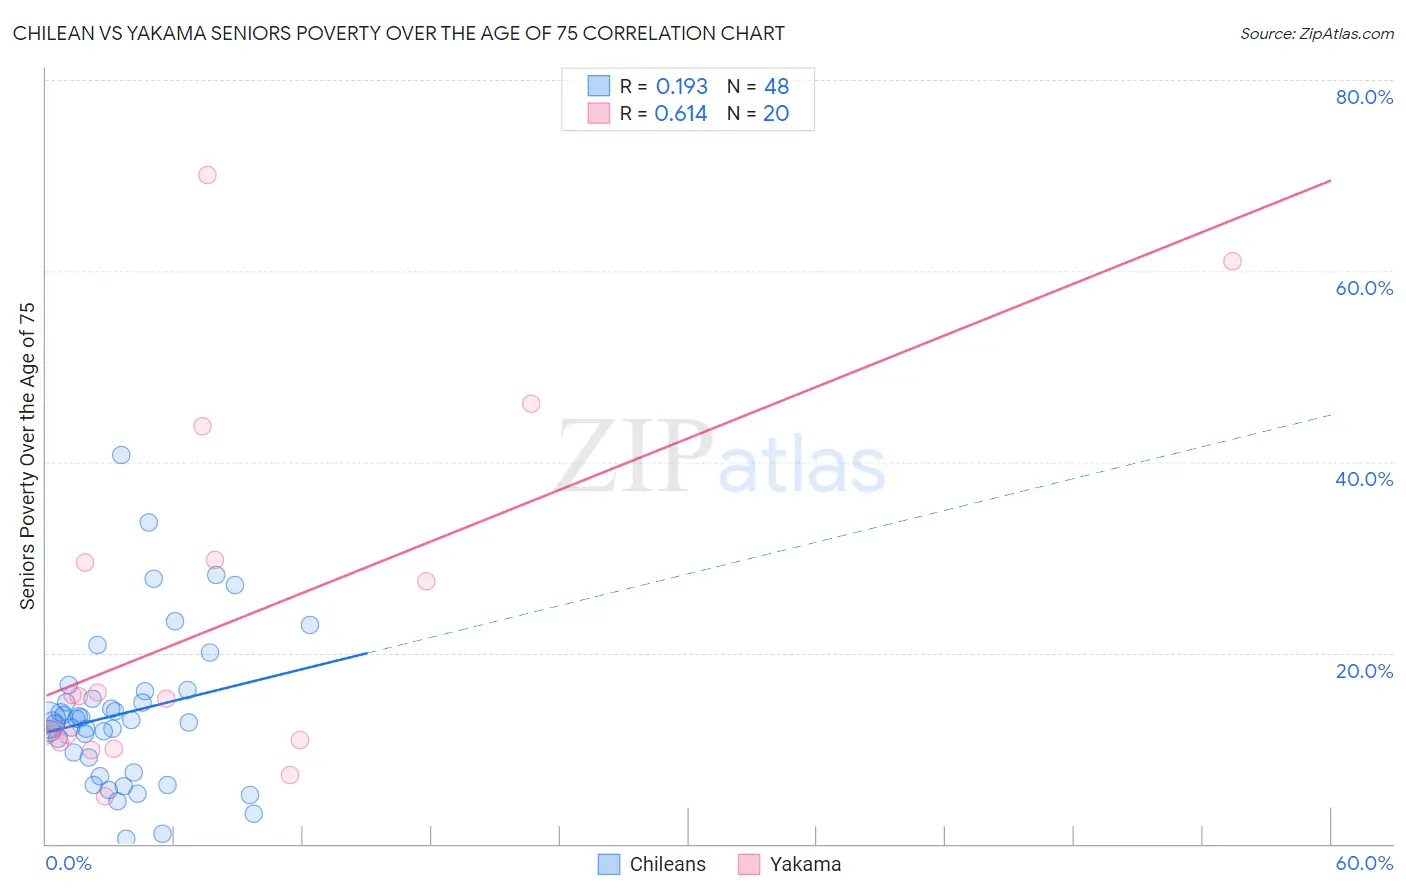 Chilean vs Yakama Seniors Poverty Over the Age of 75